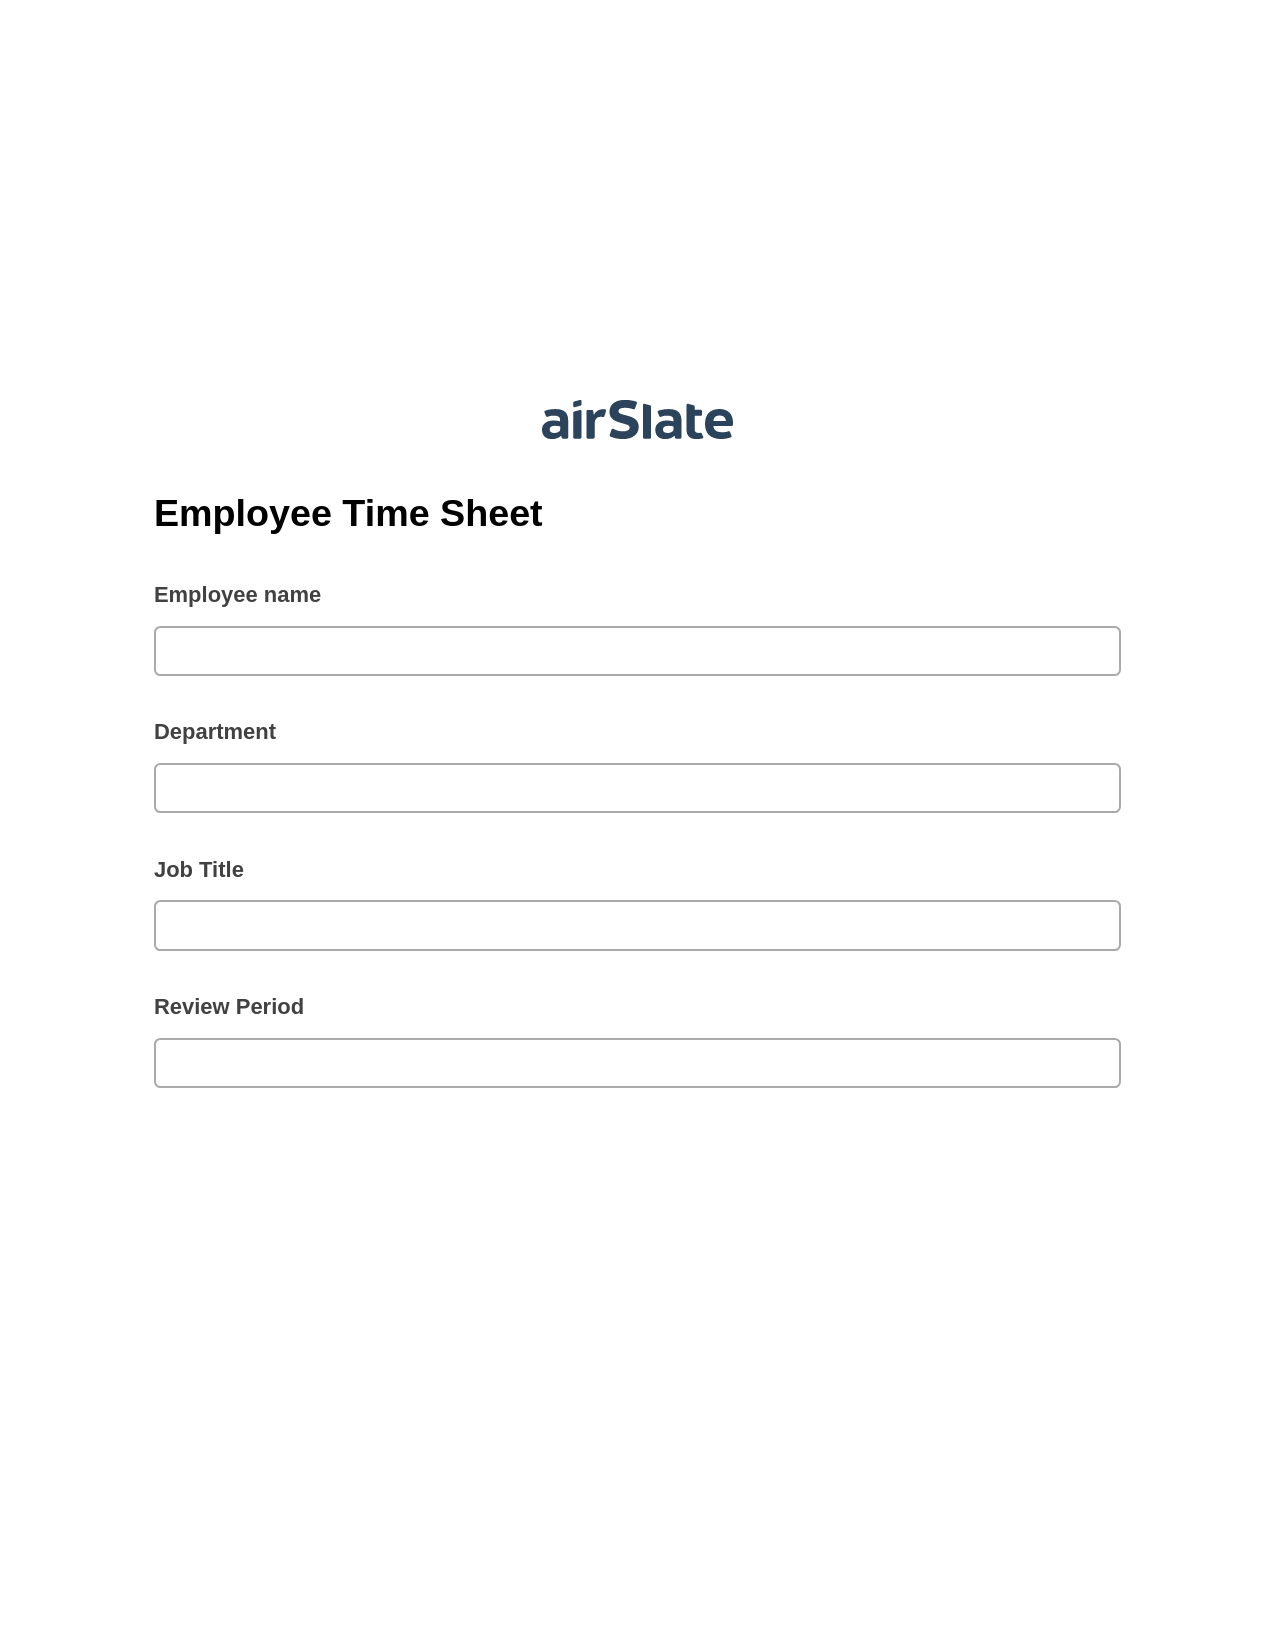 Employee Time Sheet Pre-fill from another Slate Bot, Webhook Bot, Archive to Dropbox Bot